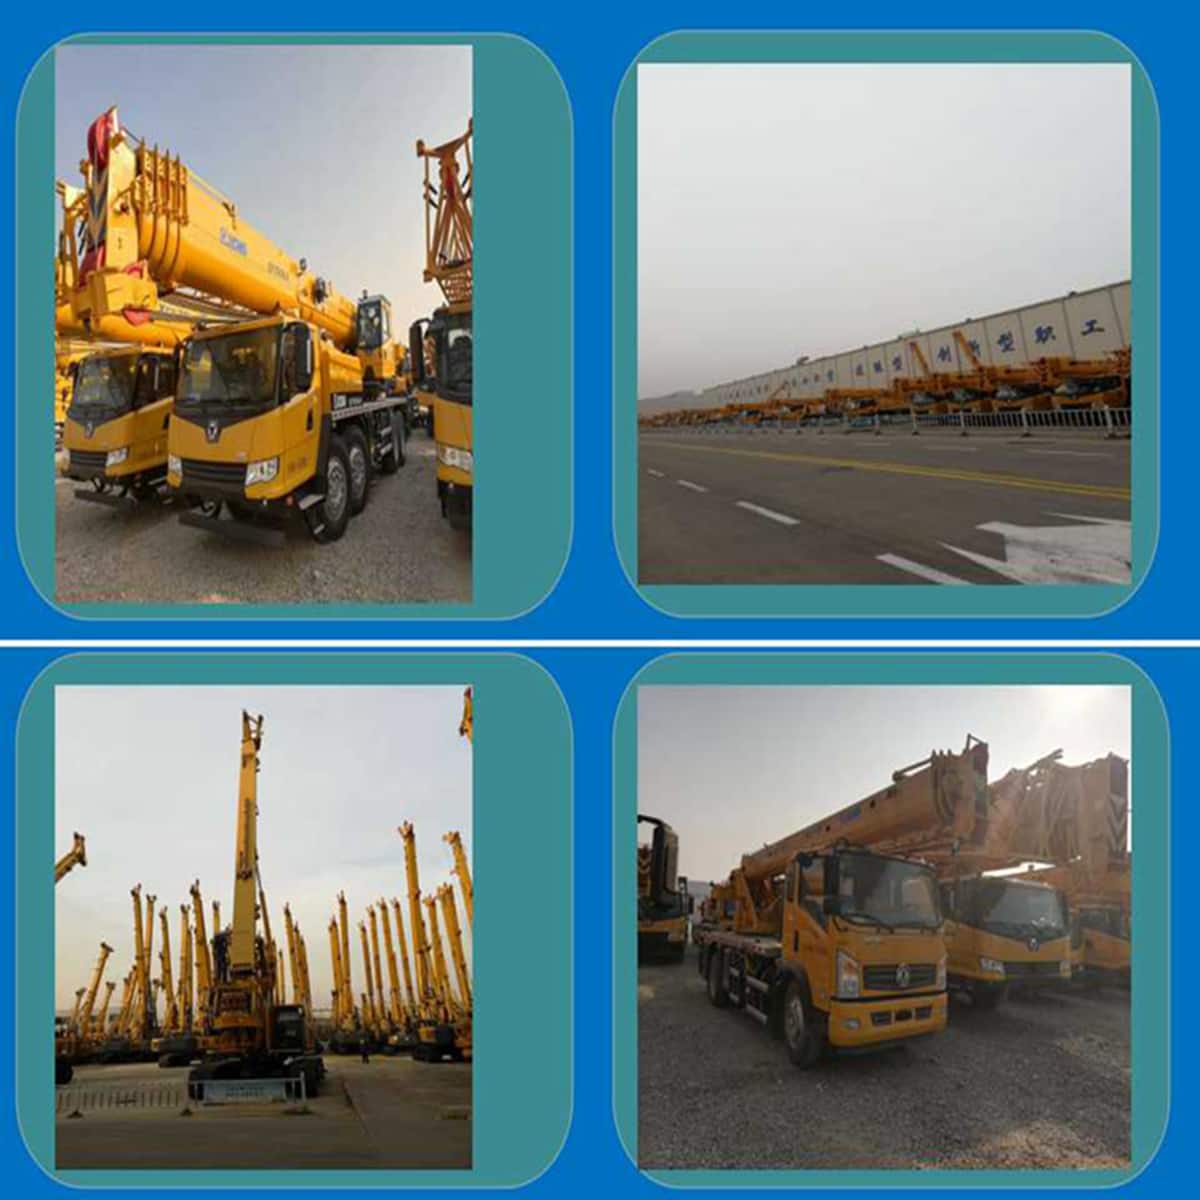 XCMG Used Official QY70K-I Truck Crane For Sale